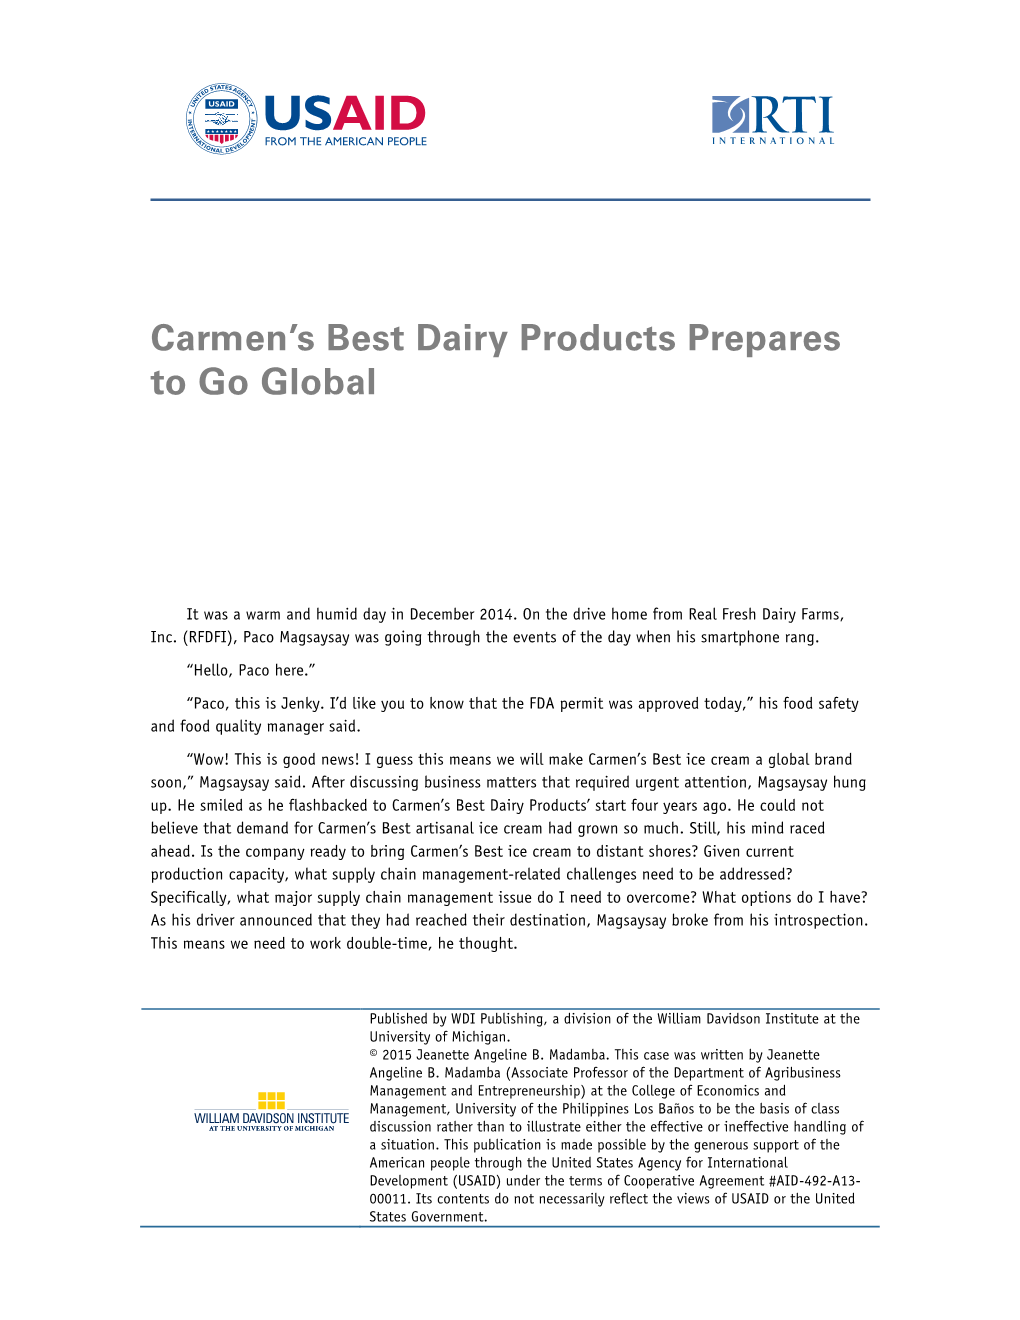 Carmen's Best Dairy Products Prepares to Go Global